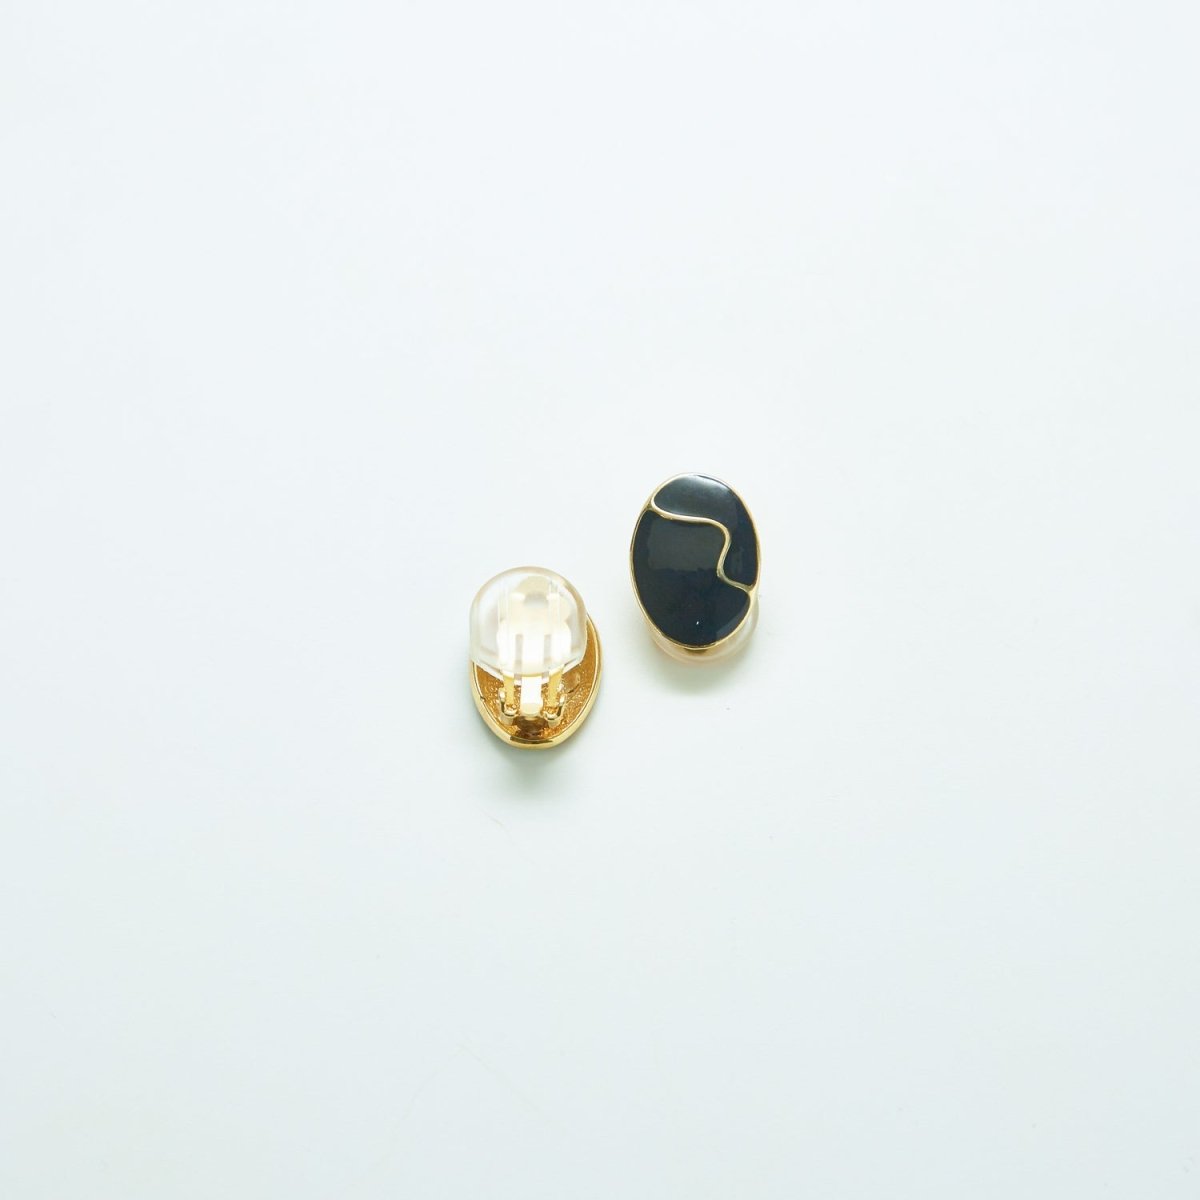 Vintage Black and Gold Minimalist Earrings - Admiral Row